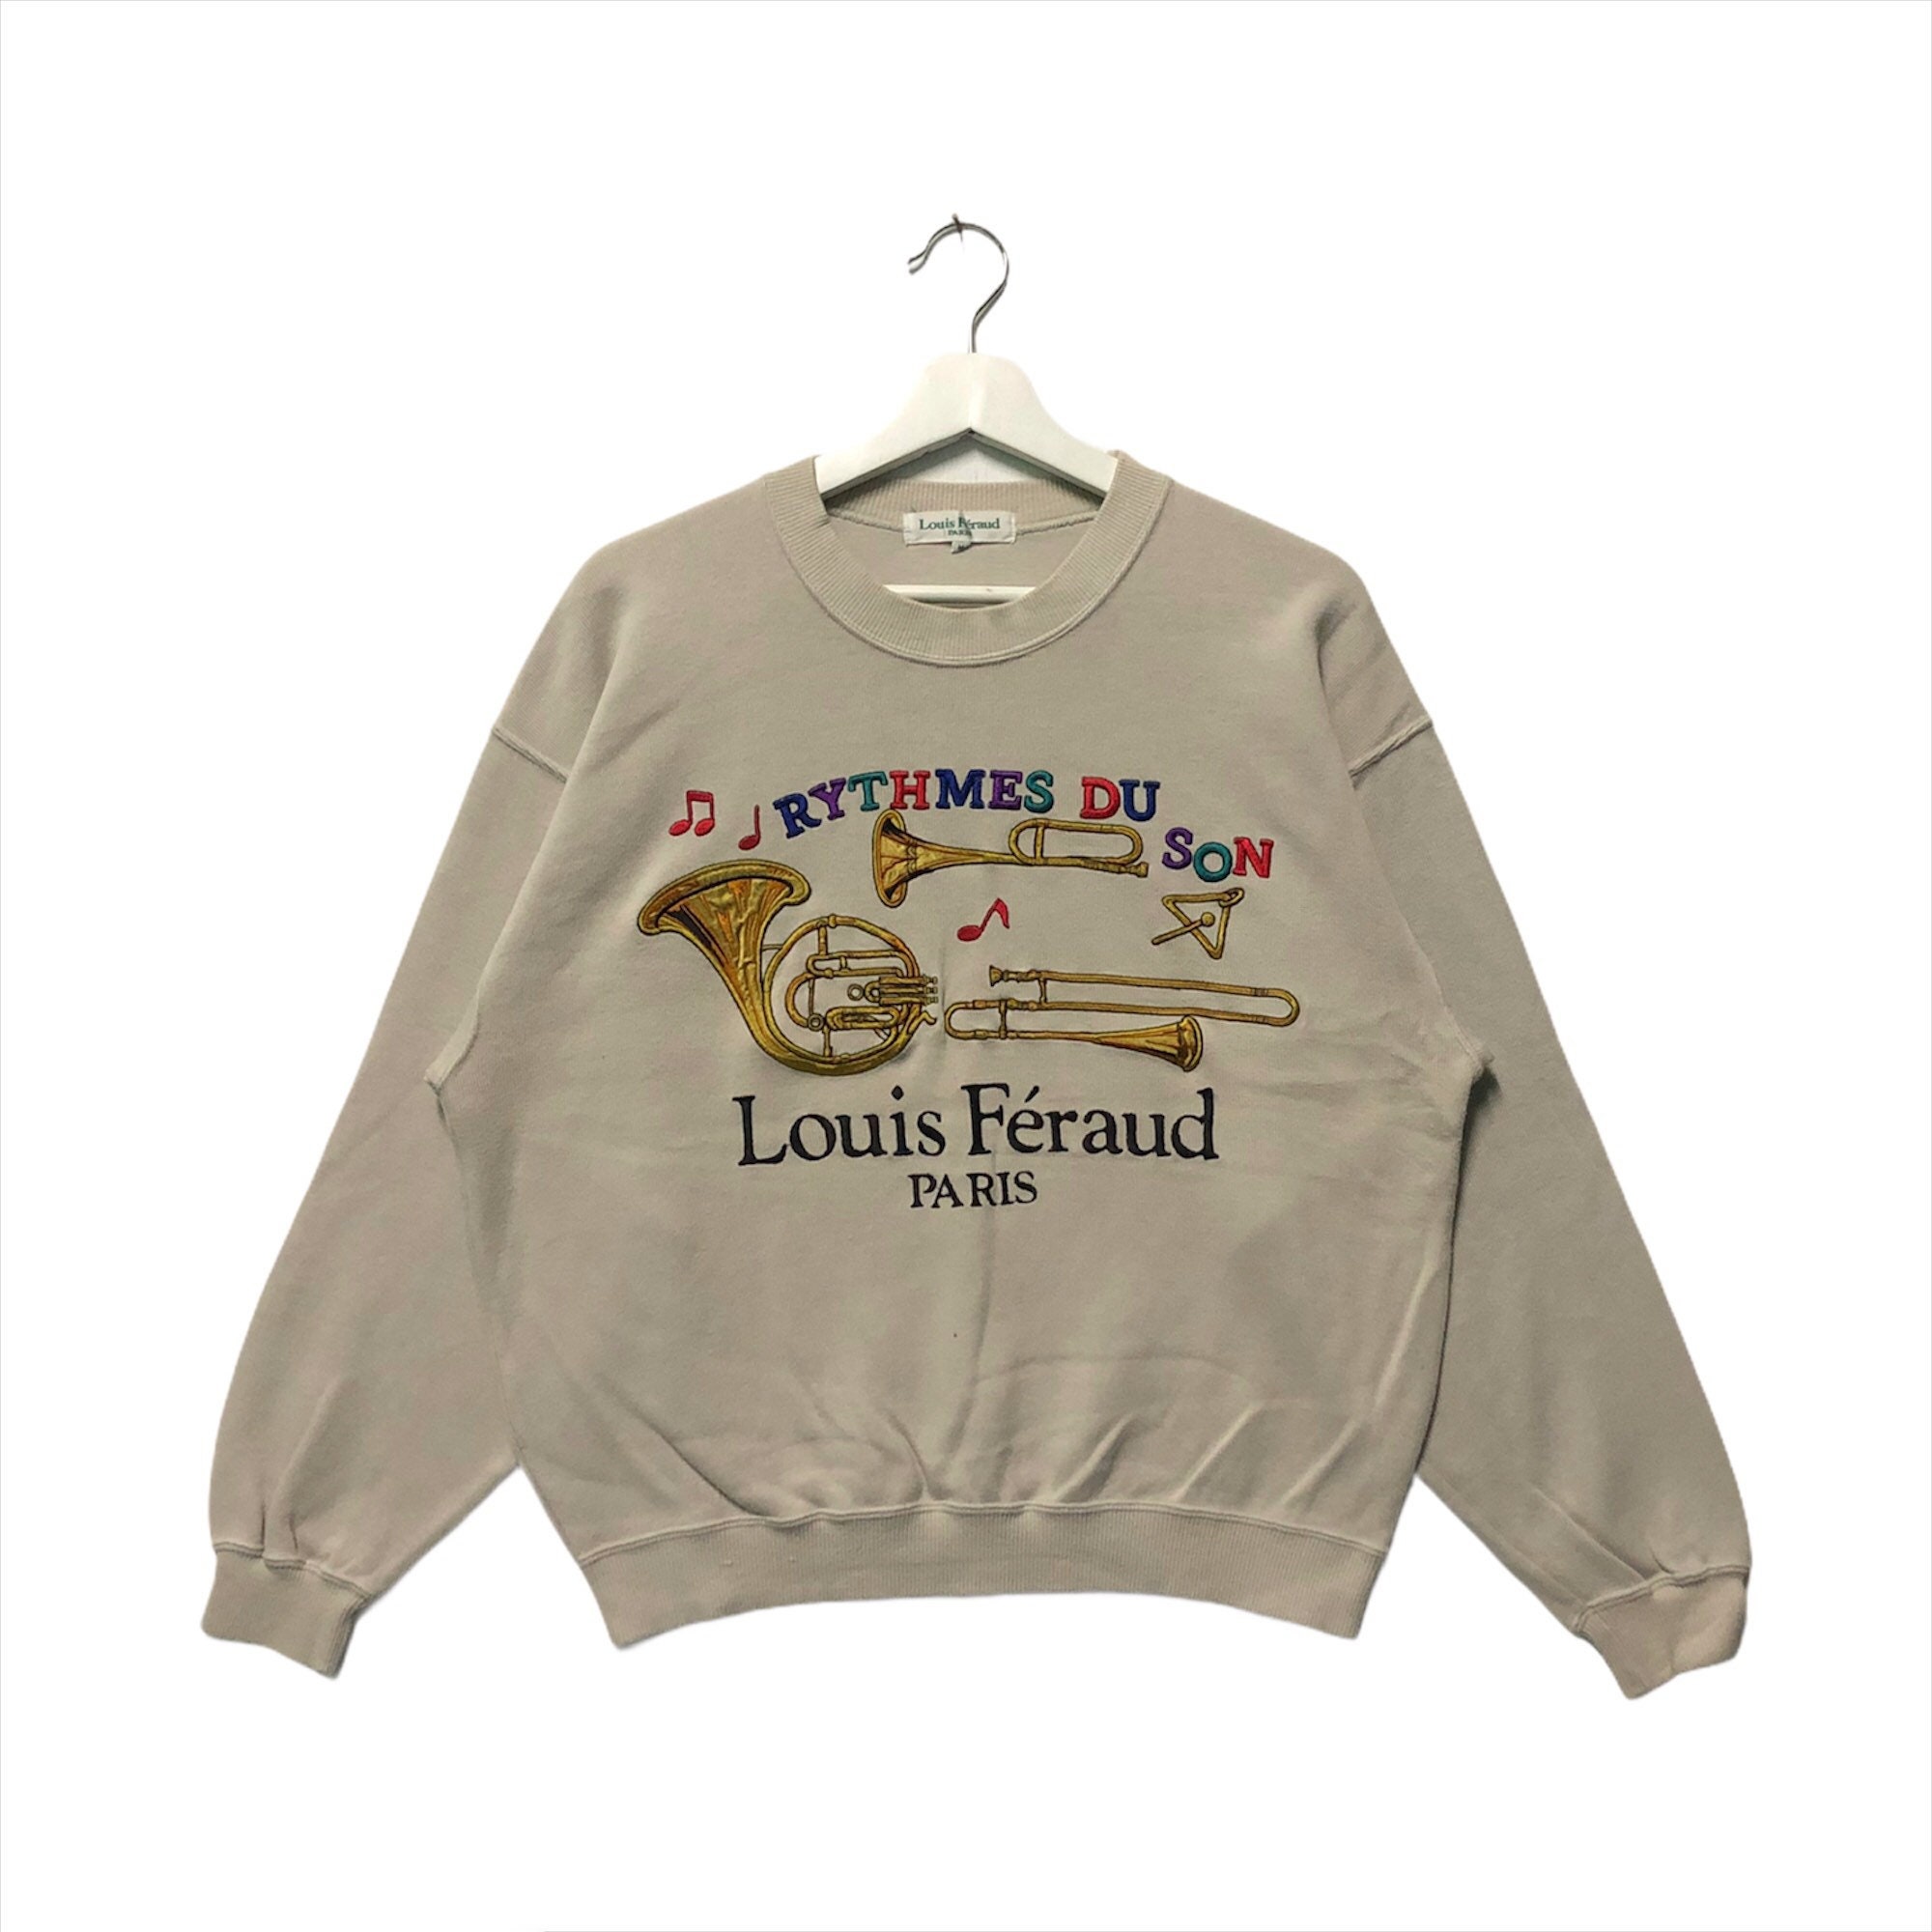 Vintage & second hand Louis Feraud tops t shirts